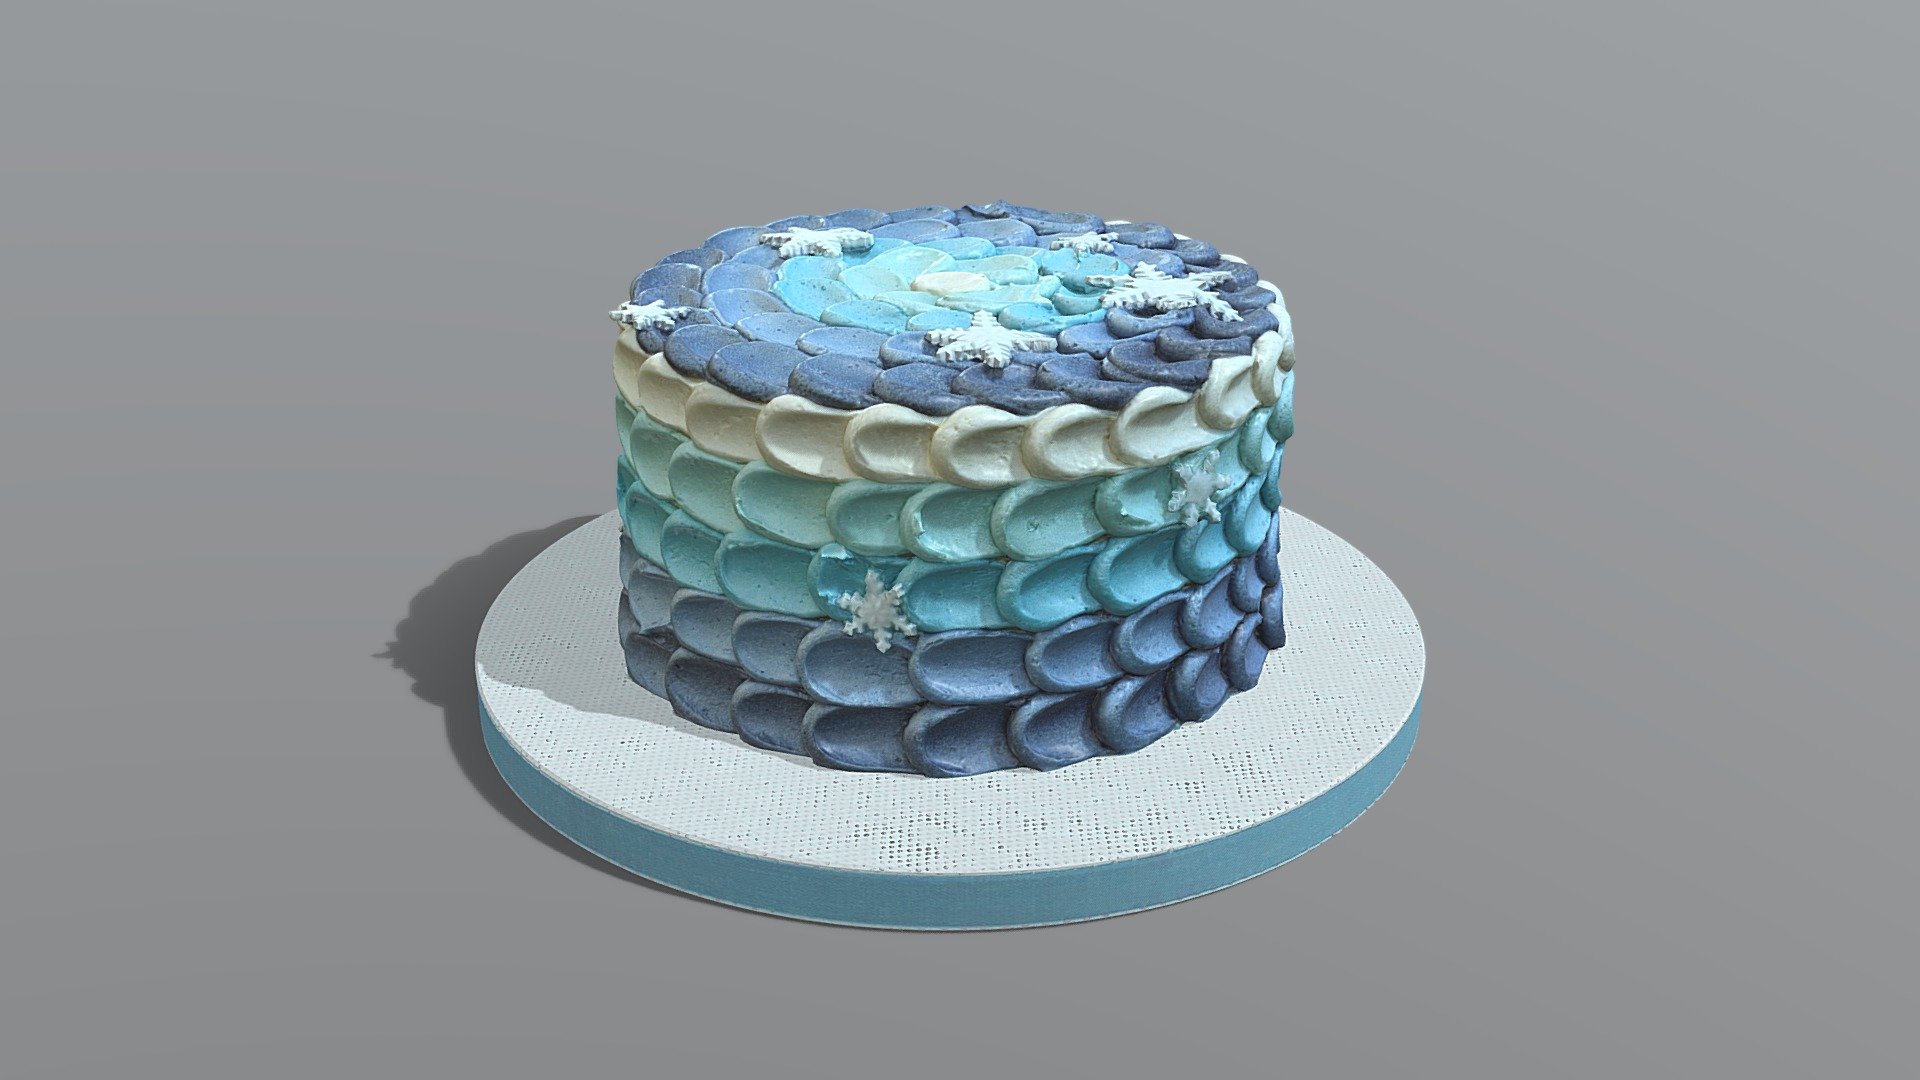 This Frozen Buttercream Cake model was created using photogrammetry which is made by CAKESBURG Premium Cake Shop in the UK. You can purchase real cake from this link: https://cakesburg.co.uk/products/rainbow-dream?_pos=1&amp;_sid=741c43992&amp;_ss=r

Textures 4096*4096px PBR photoscan-based materials Base Color, Normal Map, Roughness) - Frozen Buttercream Cake - Buy Royalty Free 3D model by Cakesburg Premium 3D Cake Shop (@Viscom_Cakesburg) 3d model